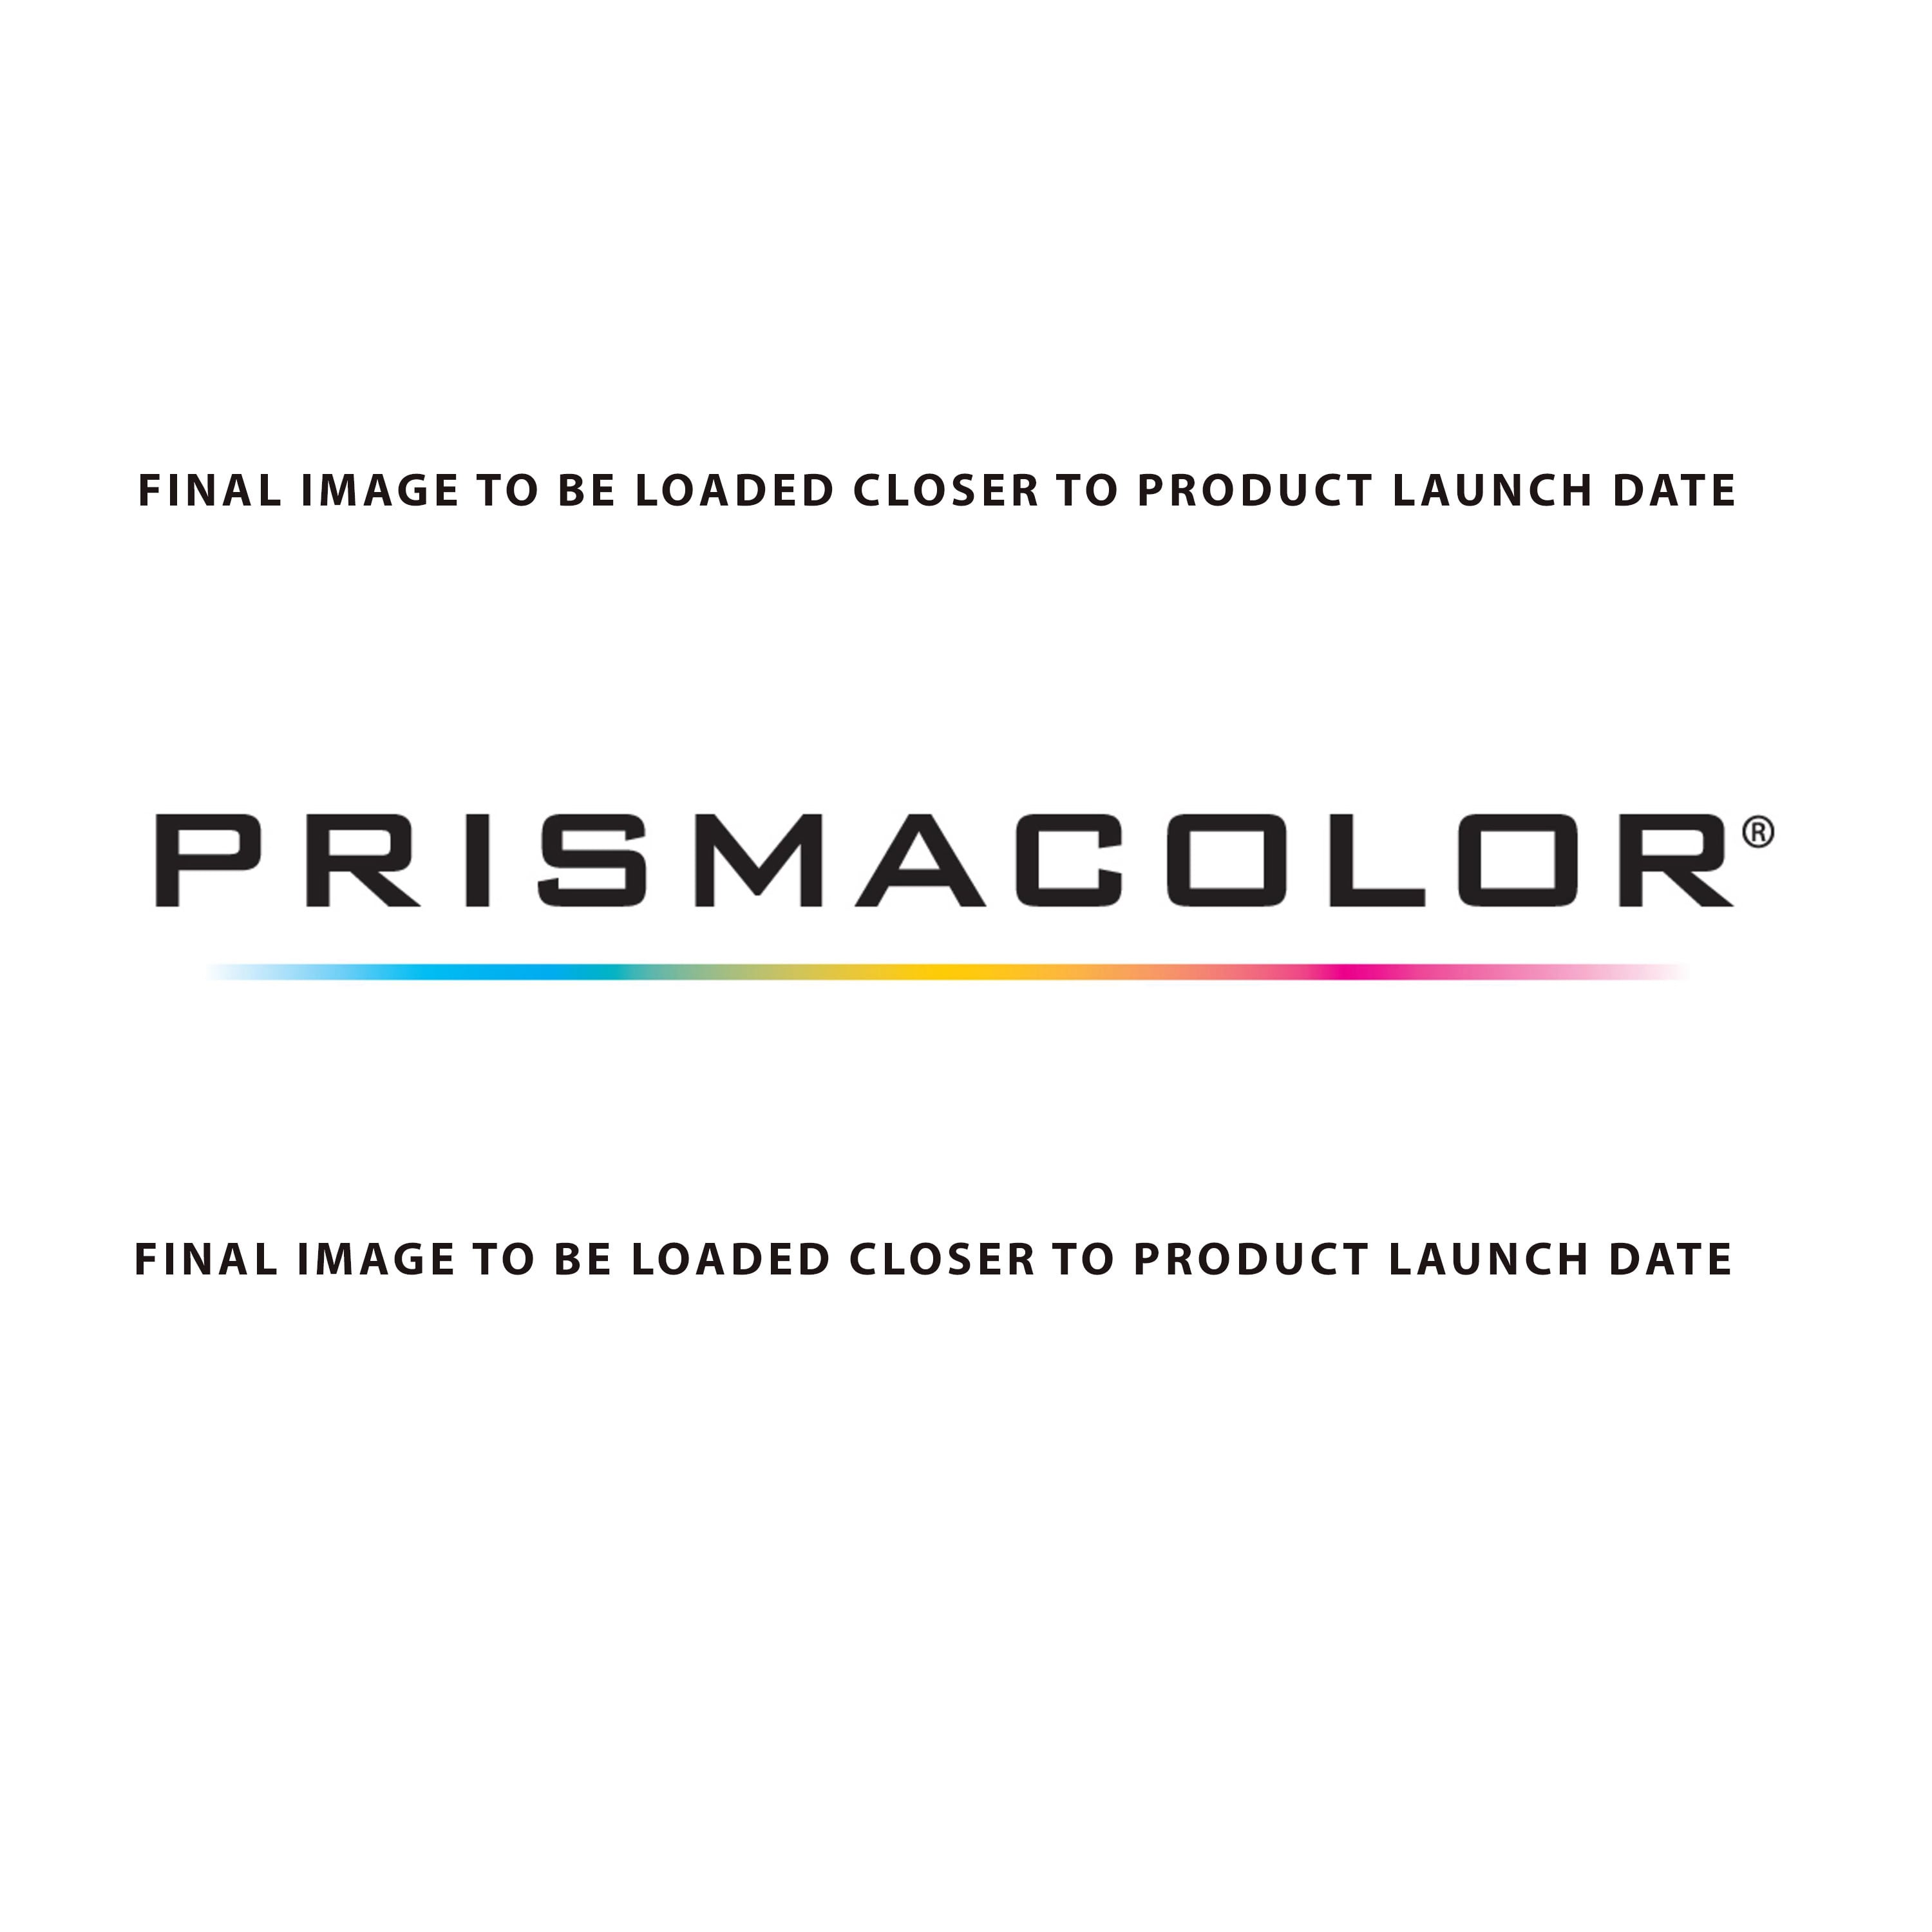 Premier® Water-Soluble Colored Pencil Sets